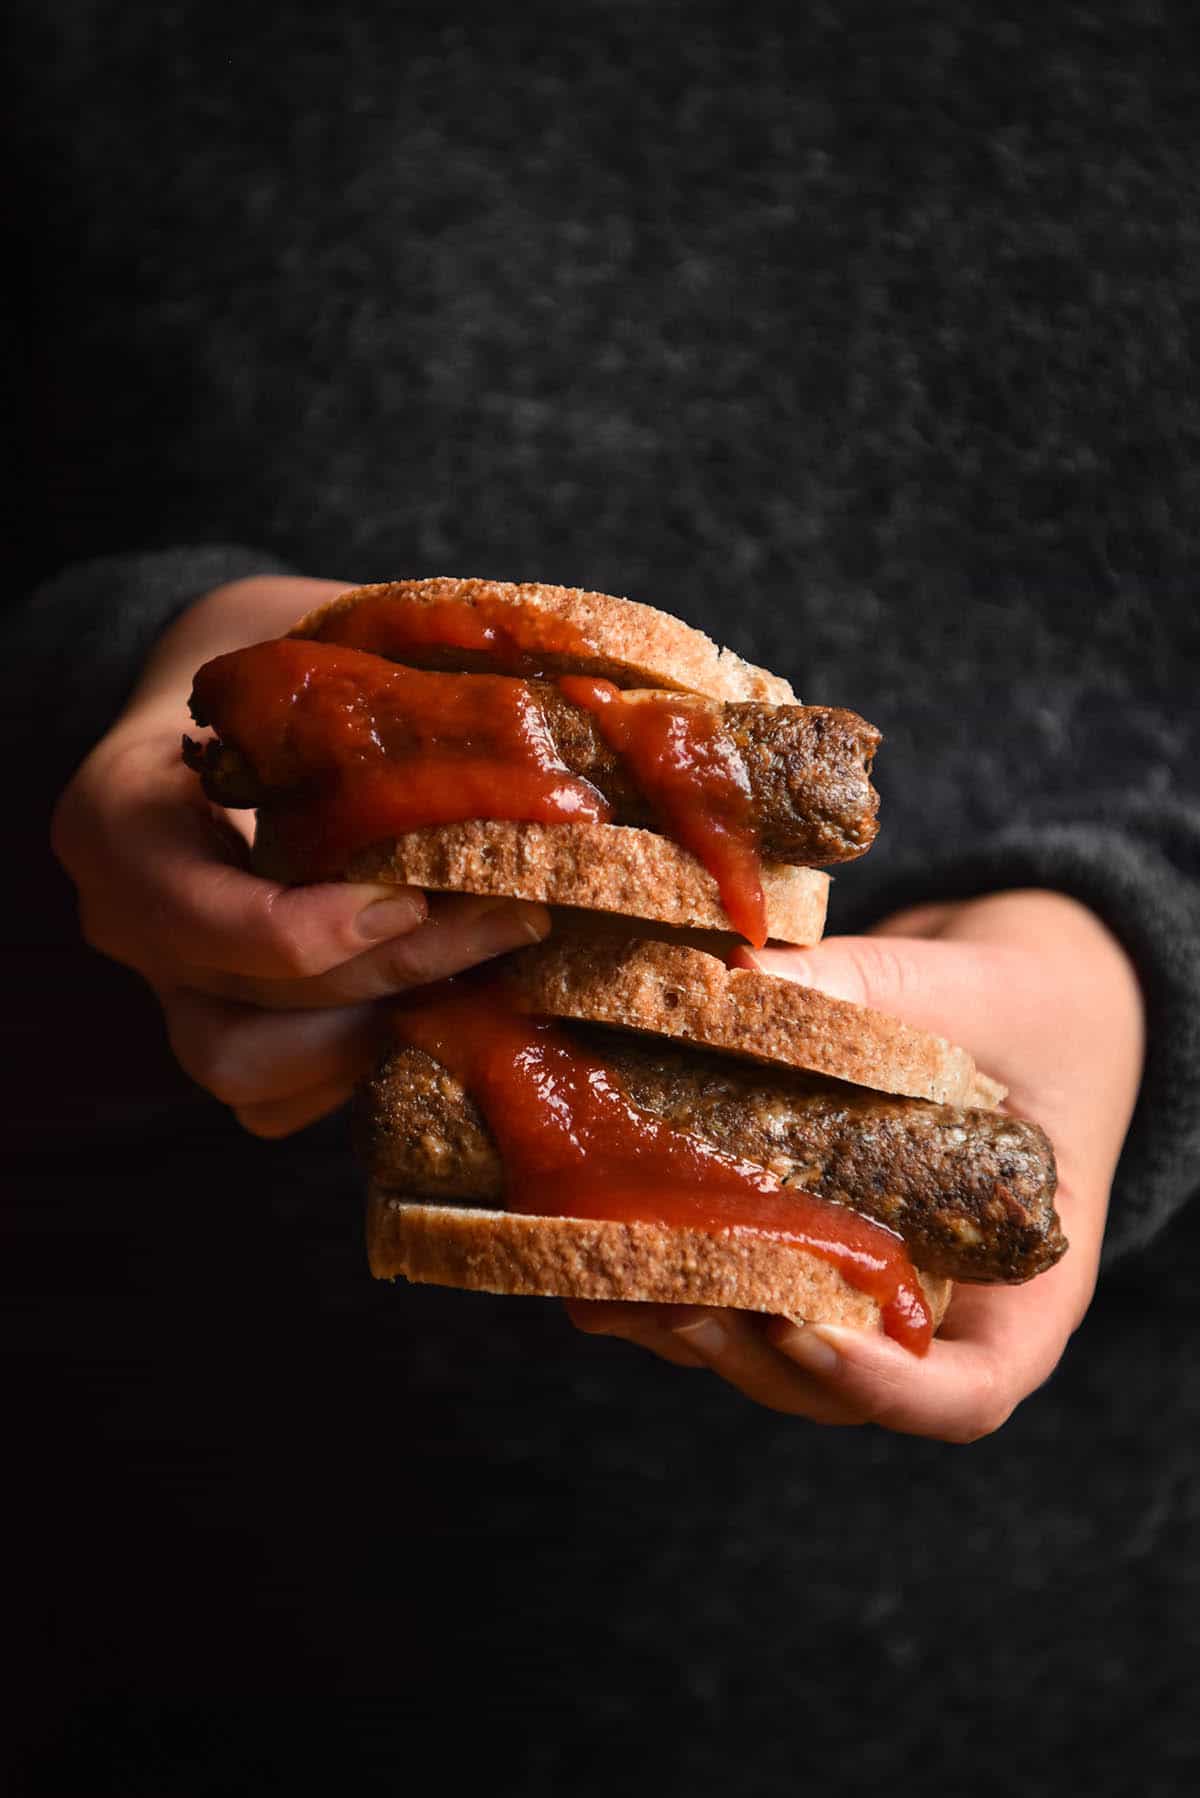 A side on image of a person in a wooly grey jumper holding out two sausage sandwiches made with grain free bread and vegan sausages. The sausages are smothered with tomato sauce.